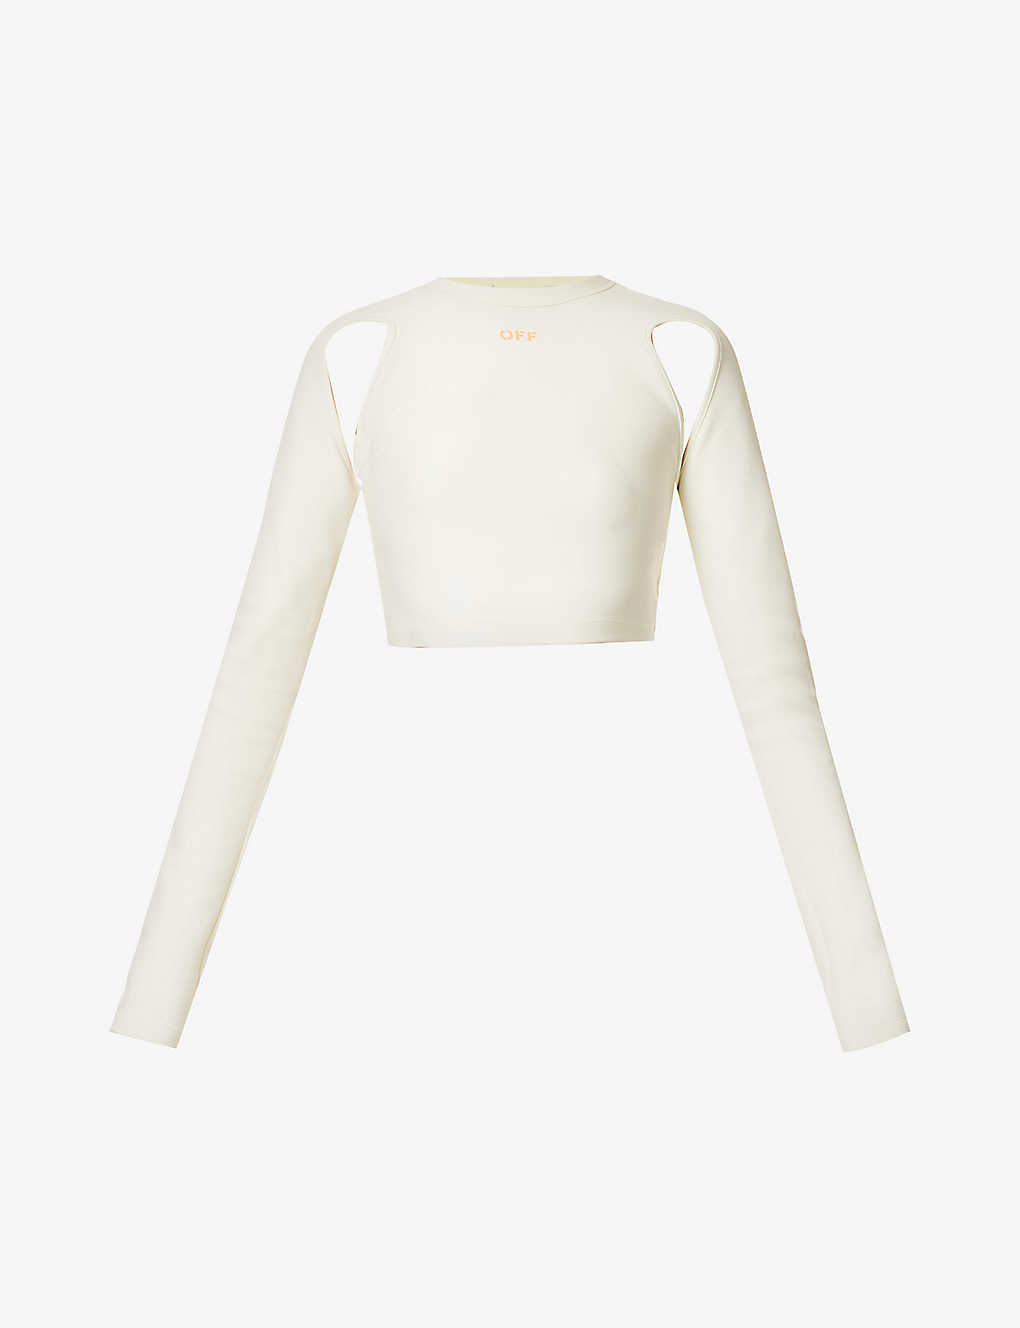 OFF-WHITE OFF-WHITE C/O VIRGIL ABLOH WOMEN'S WHITE SLEEK CUT-OUT CROPPED STRETCH-WOVEN TOP,63828437